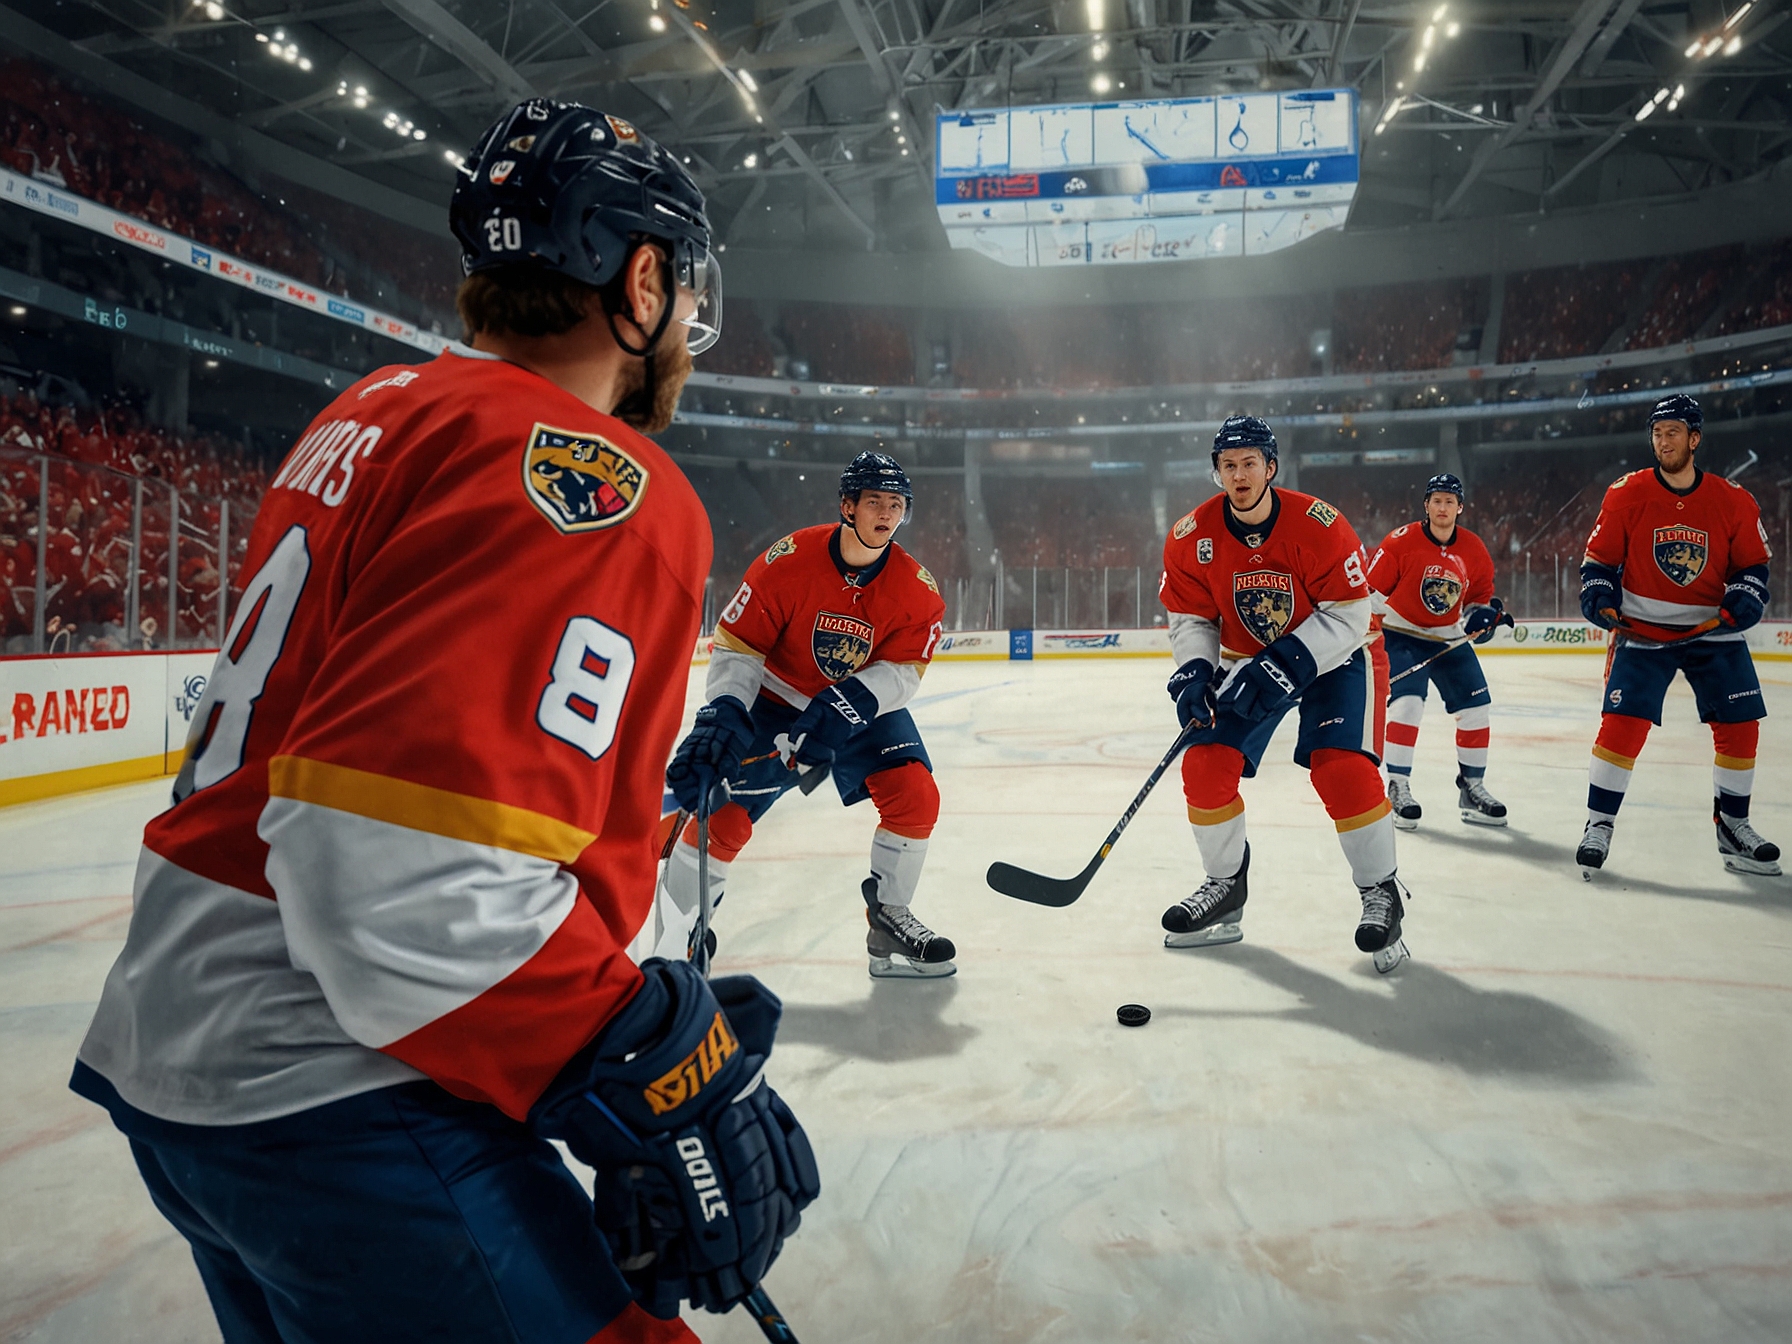 An image showing Florida Panthers players engaged in an intense practice session, focusing on strategic drills as they prepare for the crucial Game 7 in the Stanley Cup playoffs.